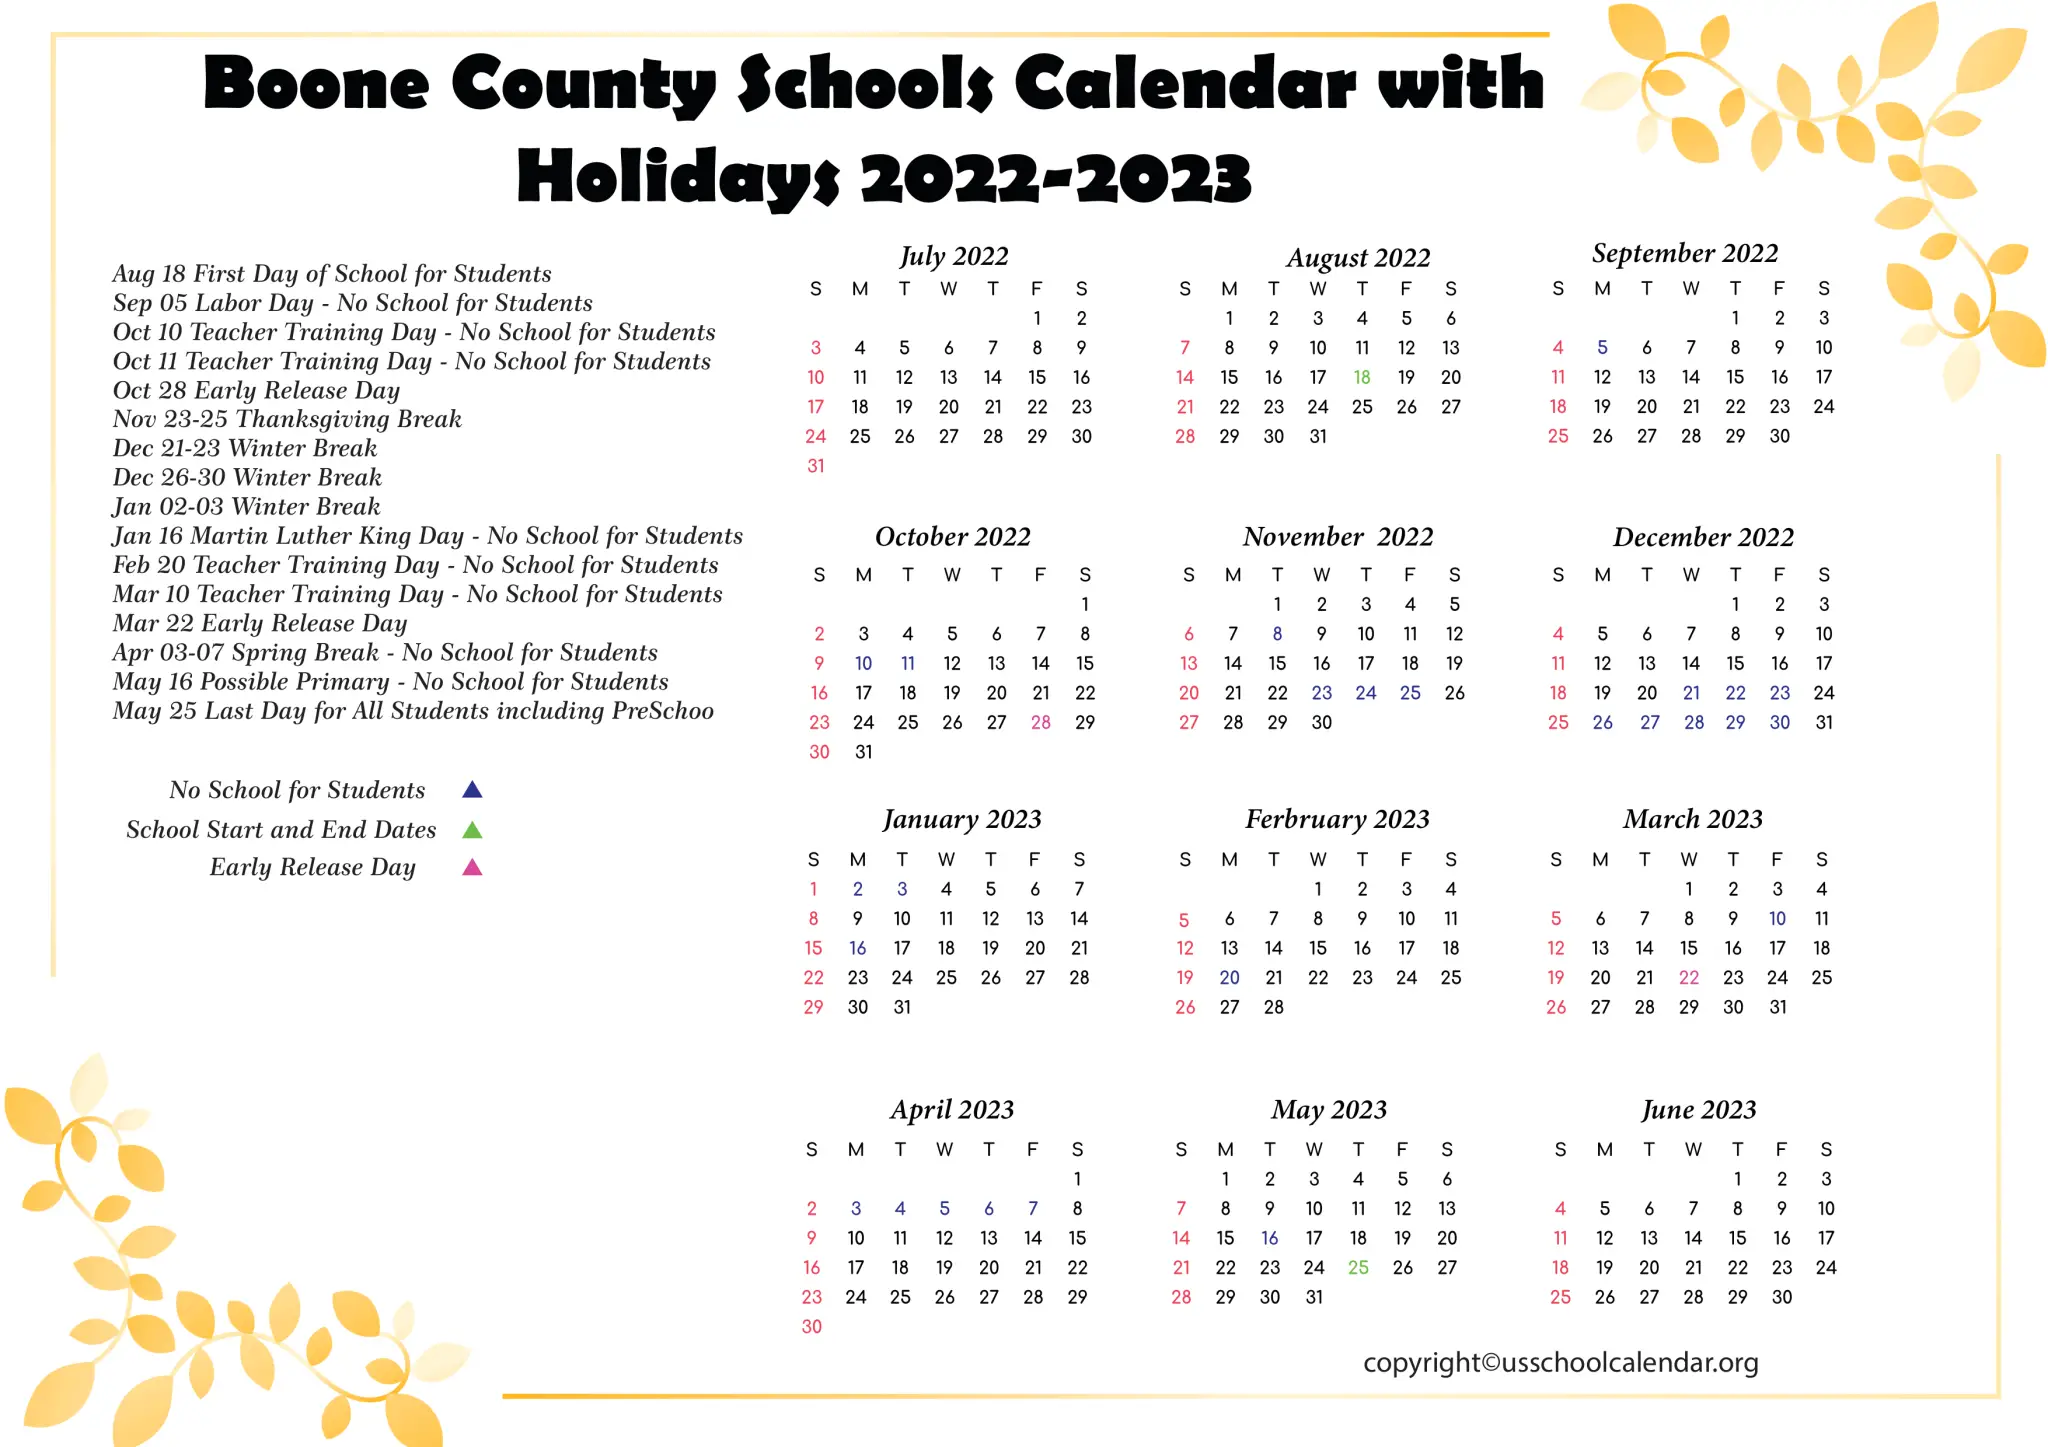 Boone County Schools Calendar with Holidays 20222023